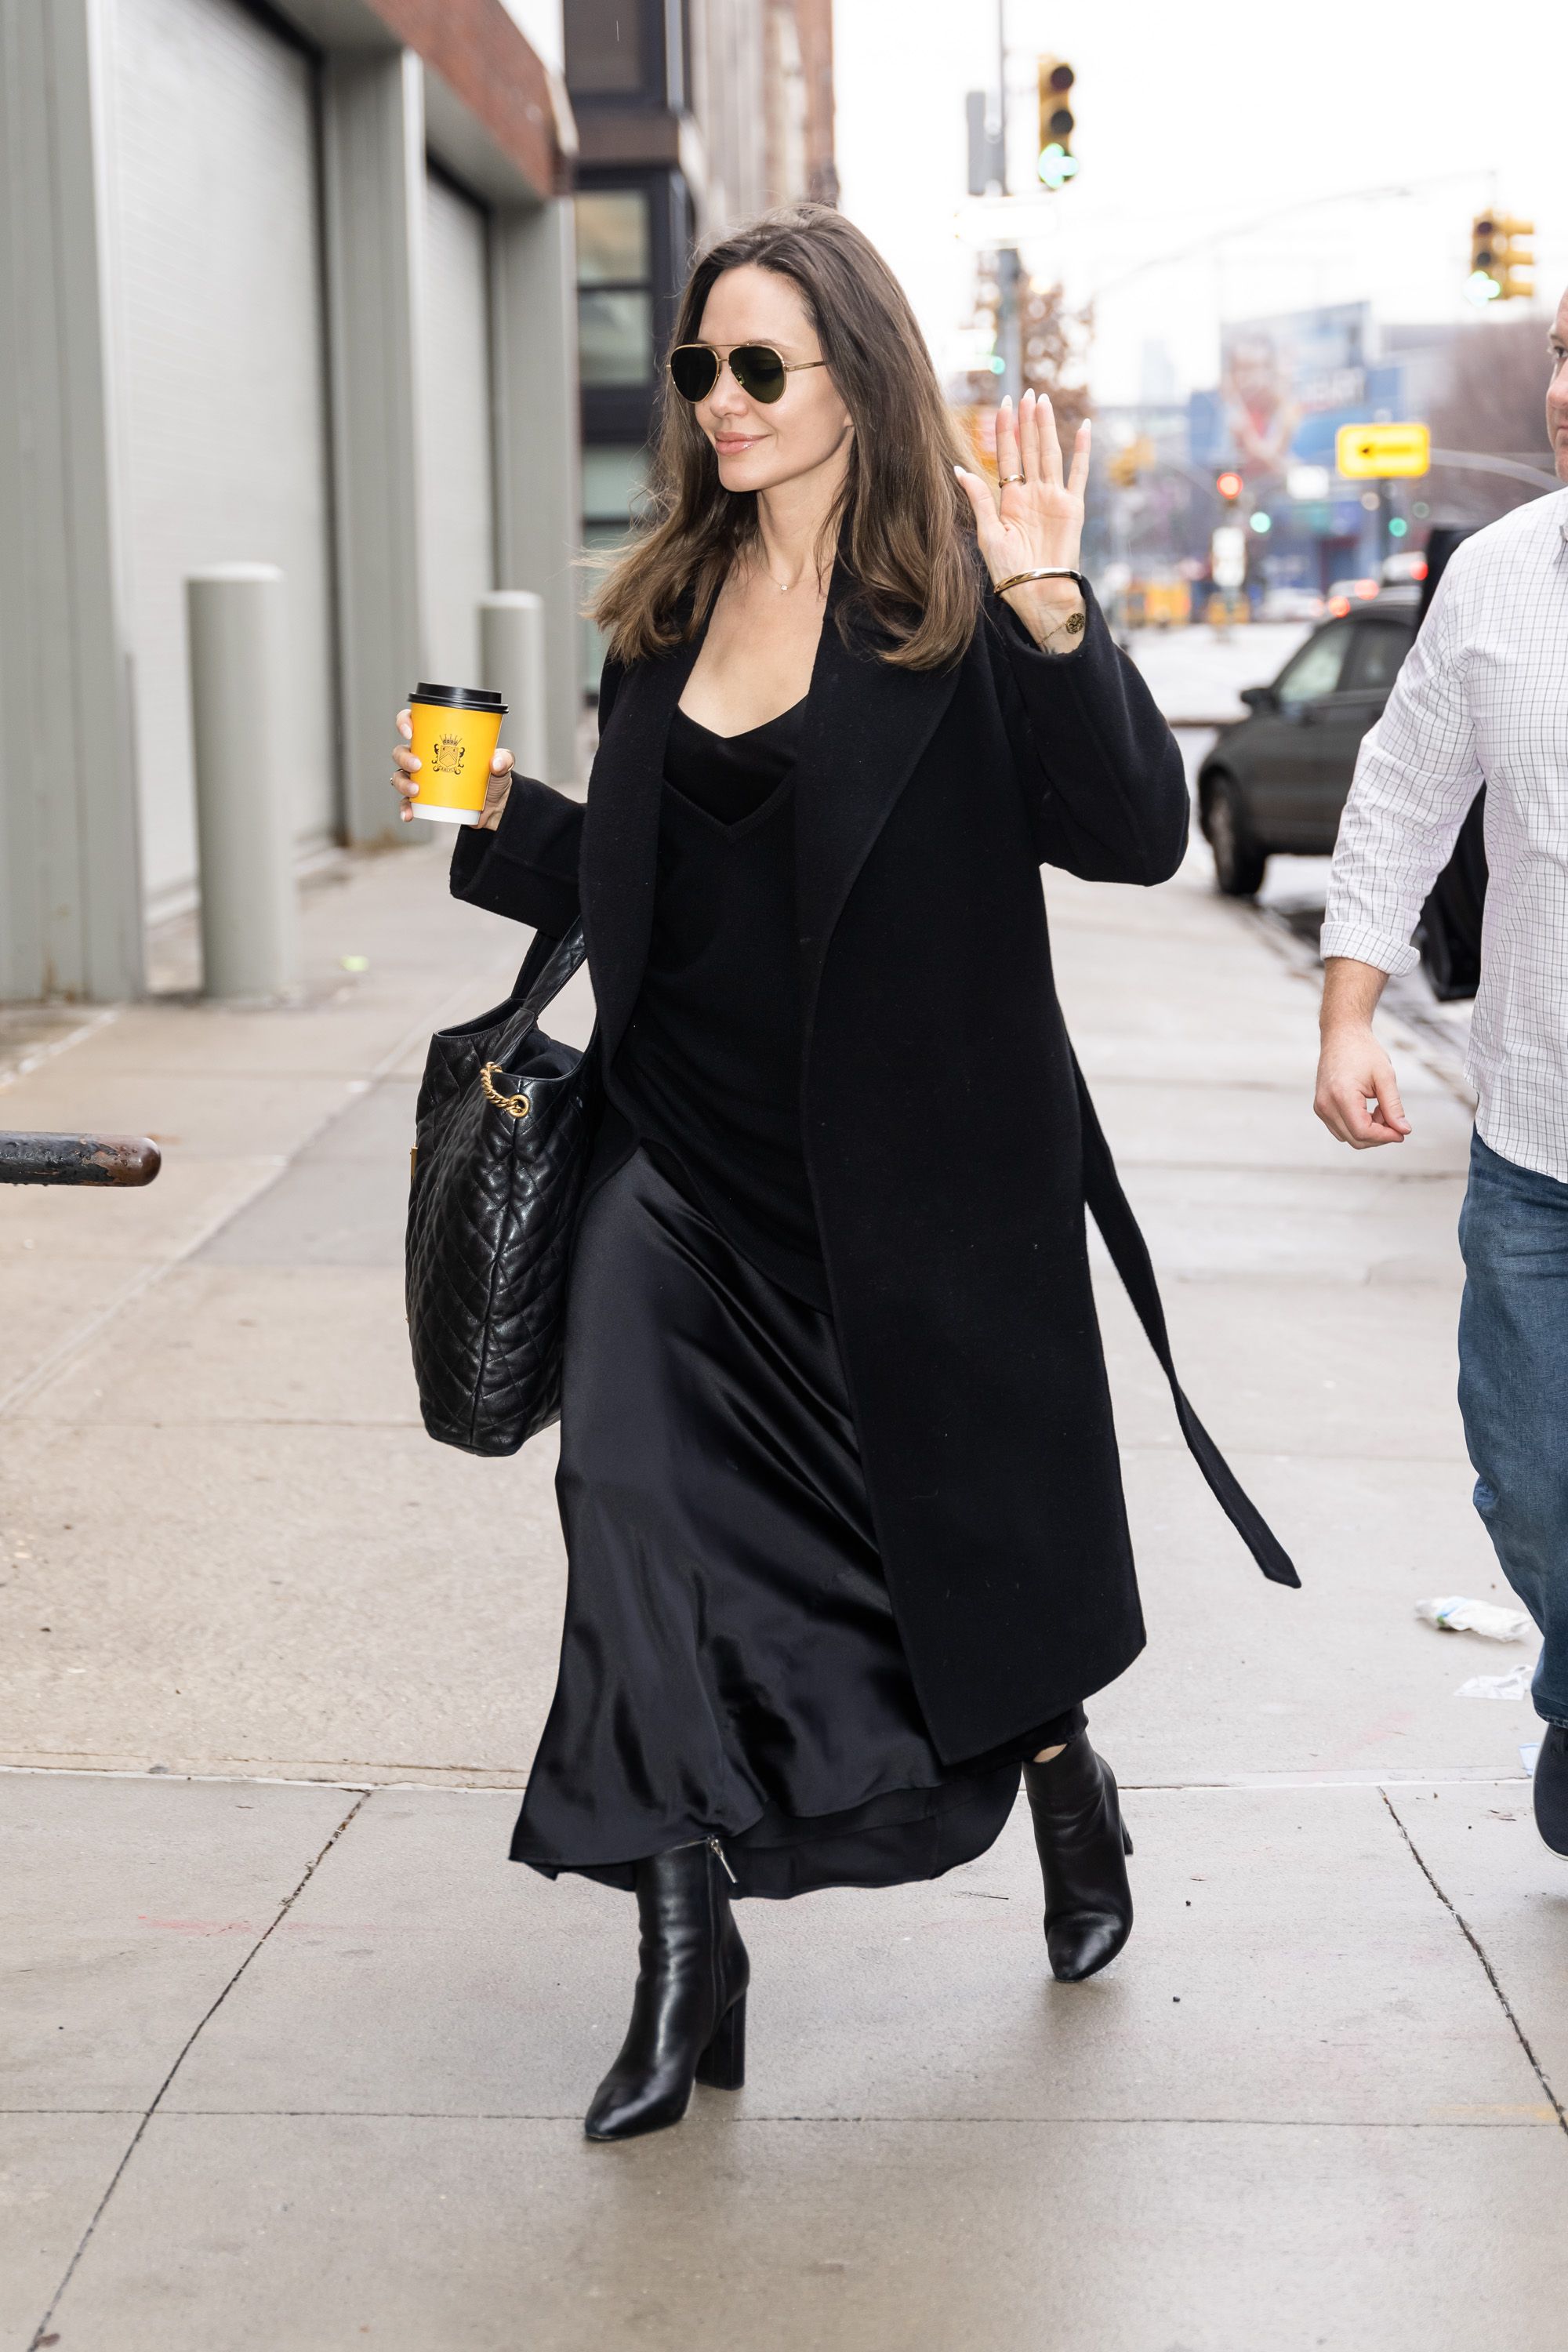 Angelina Jolie's Celine Bag Is Filled With The Most Unfussy Items